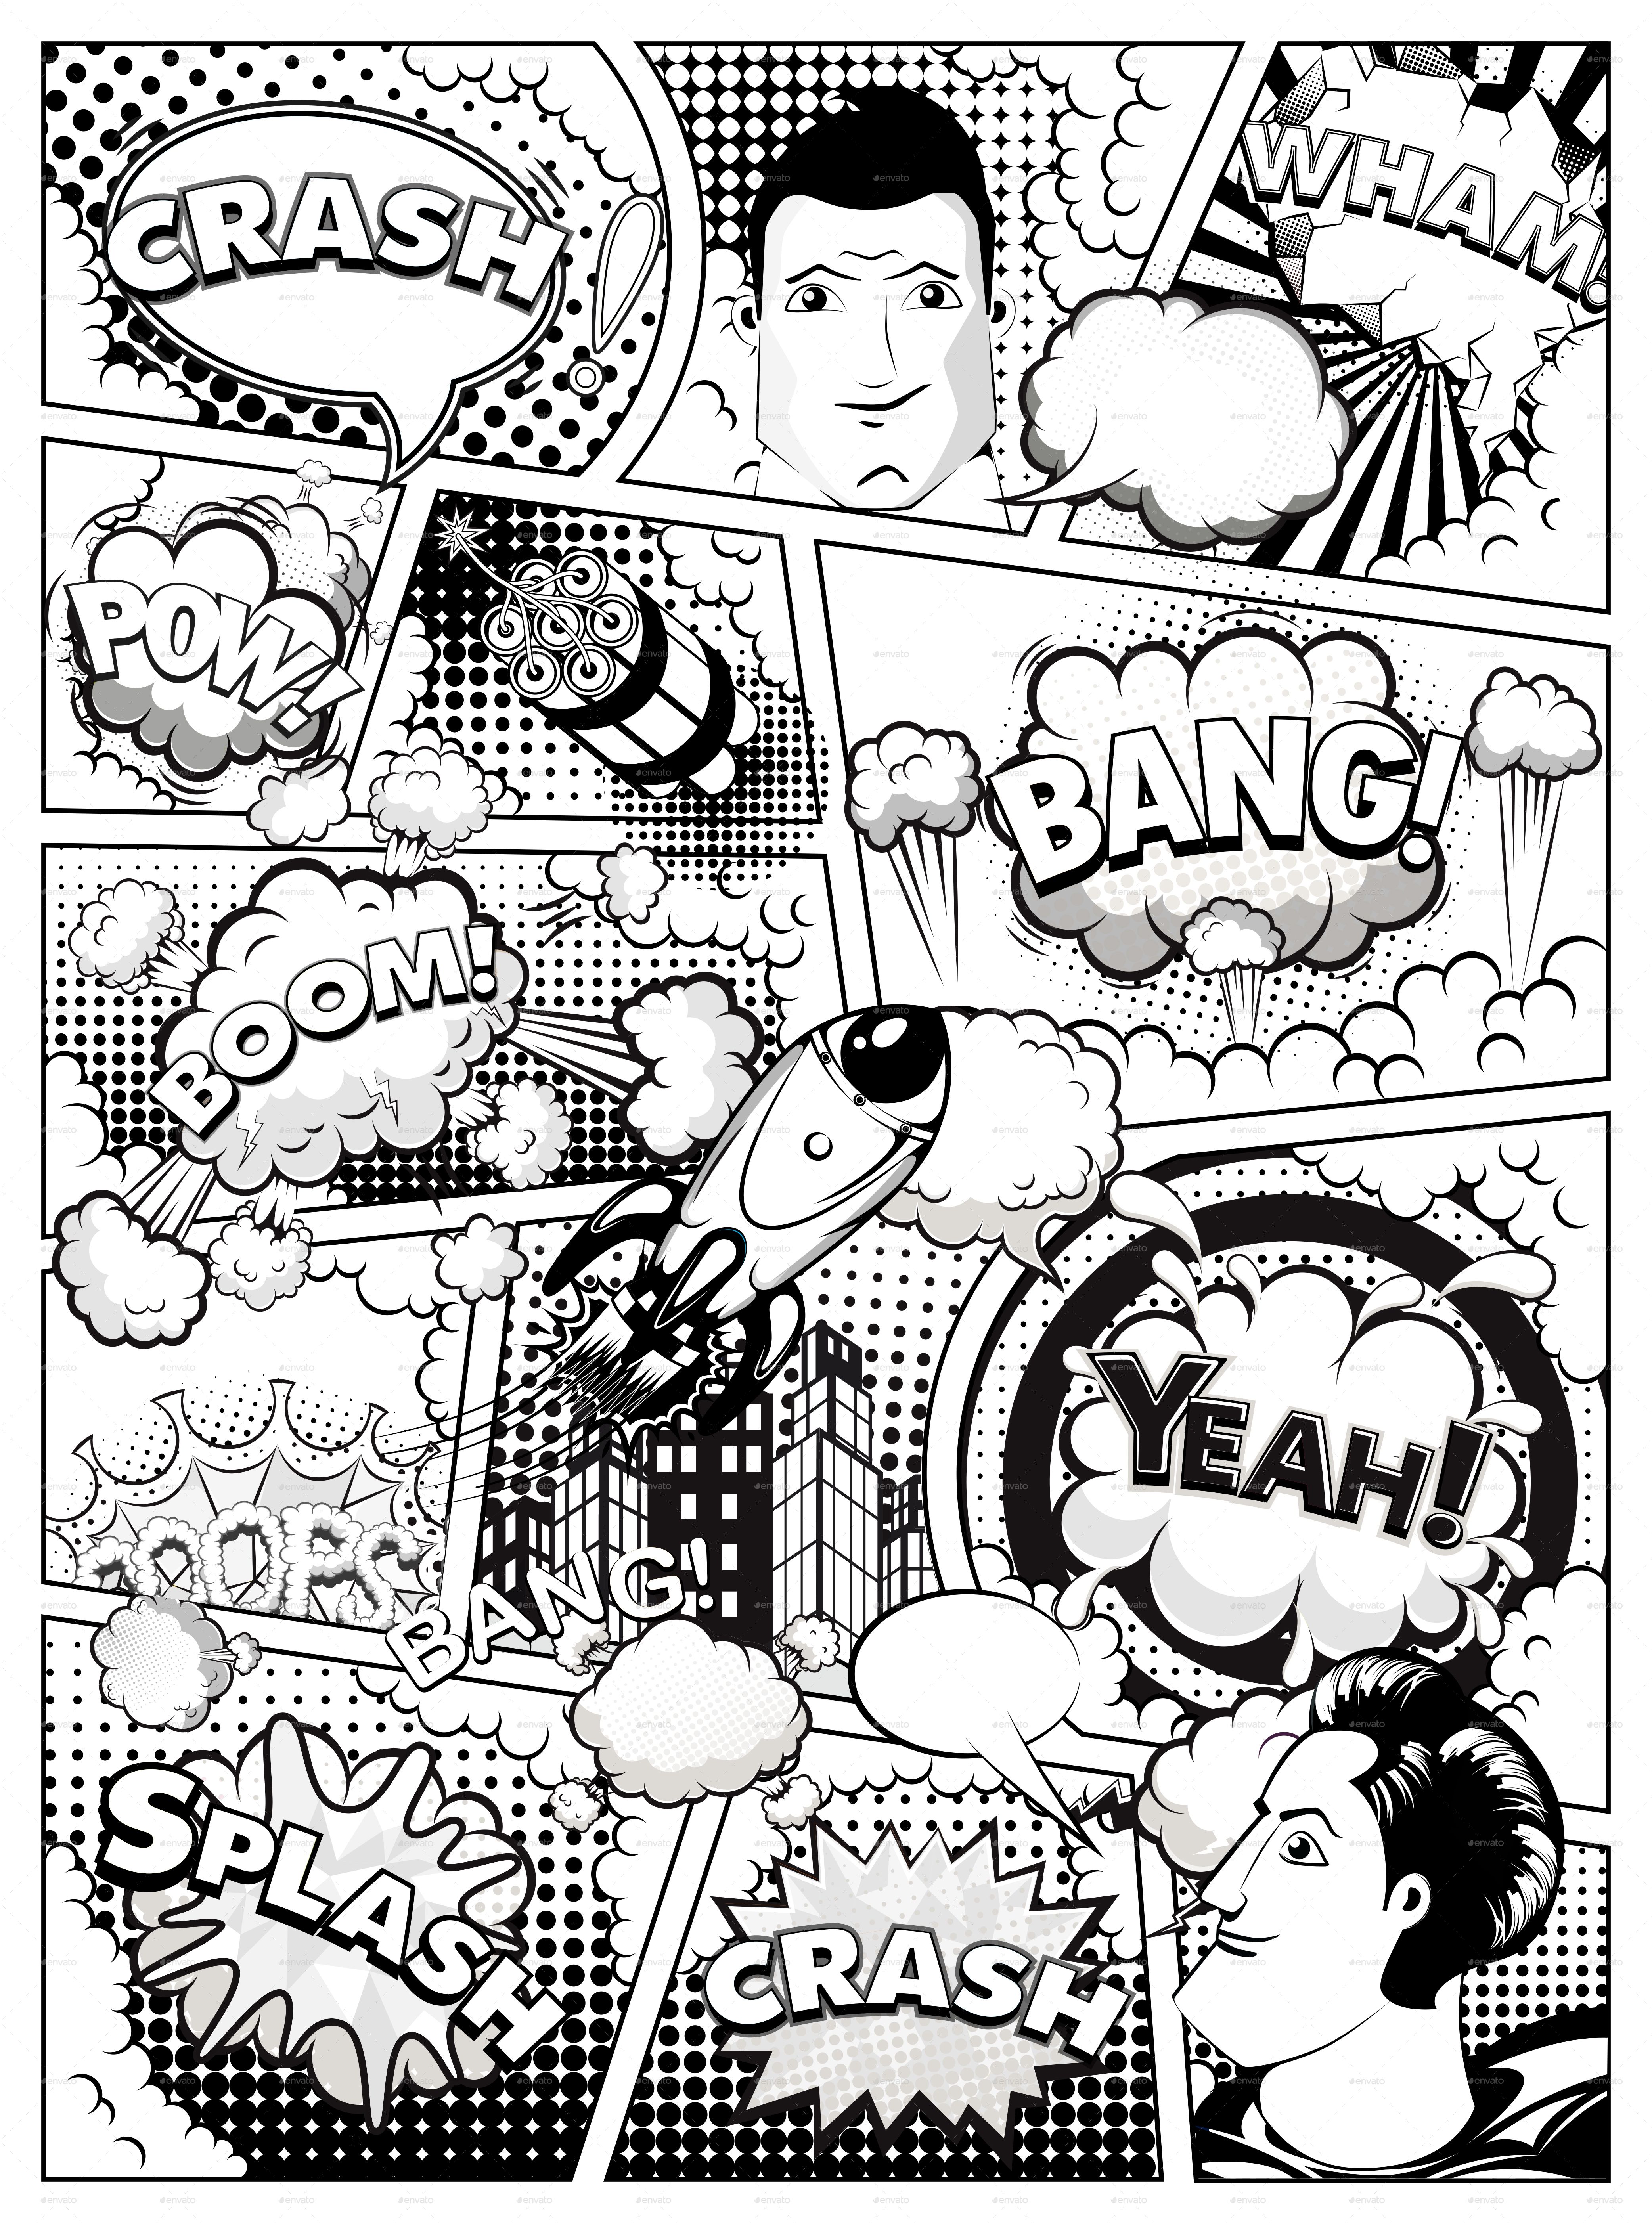 Black and White Comic Book Page. Black and white comics, Comic book background, Comic book pages